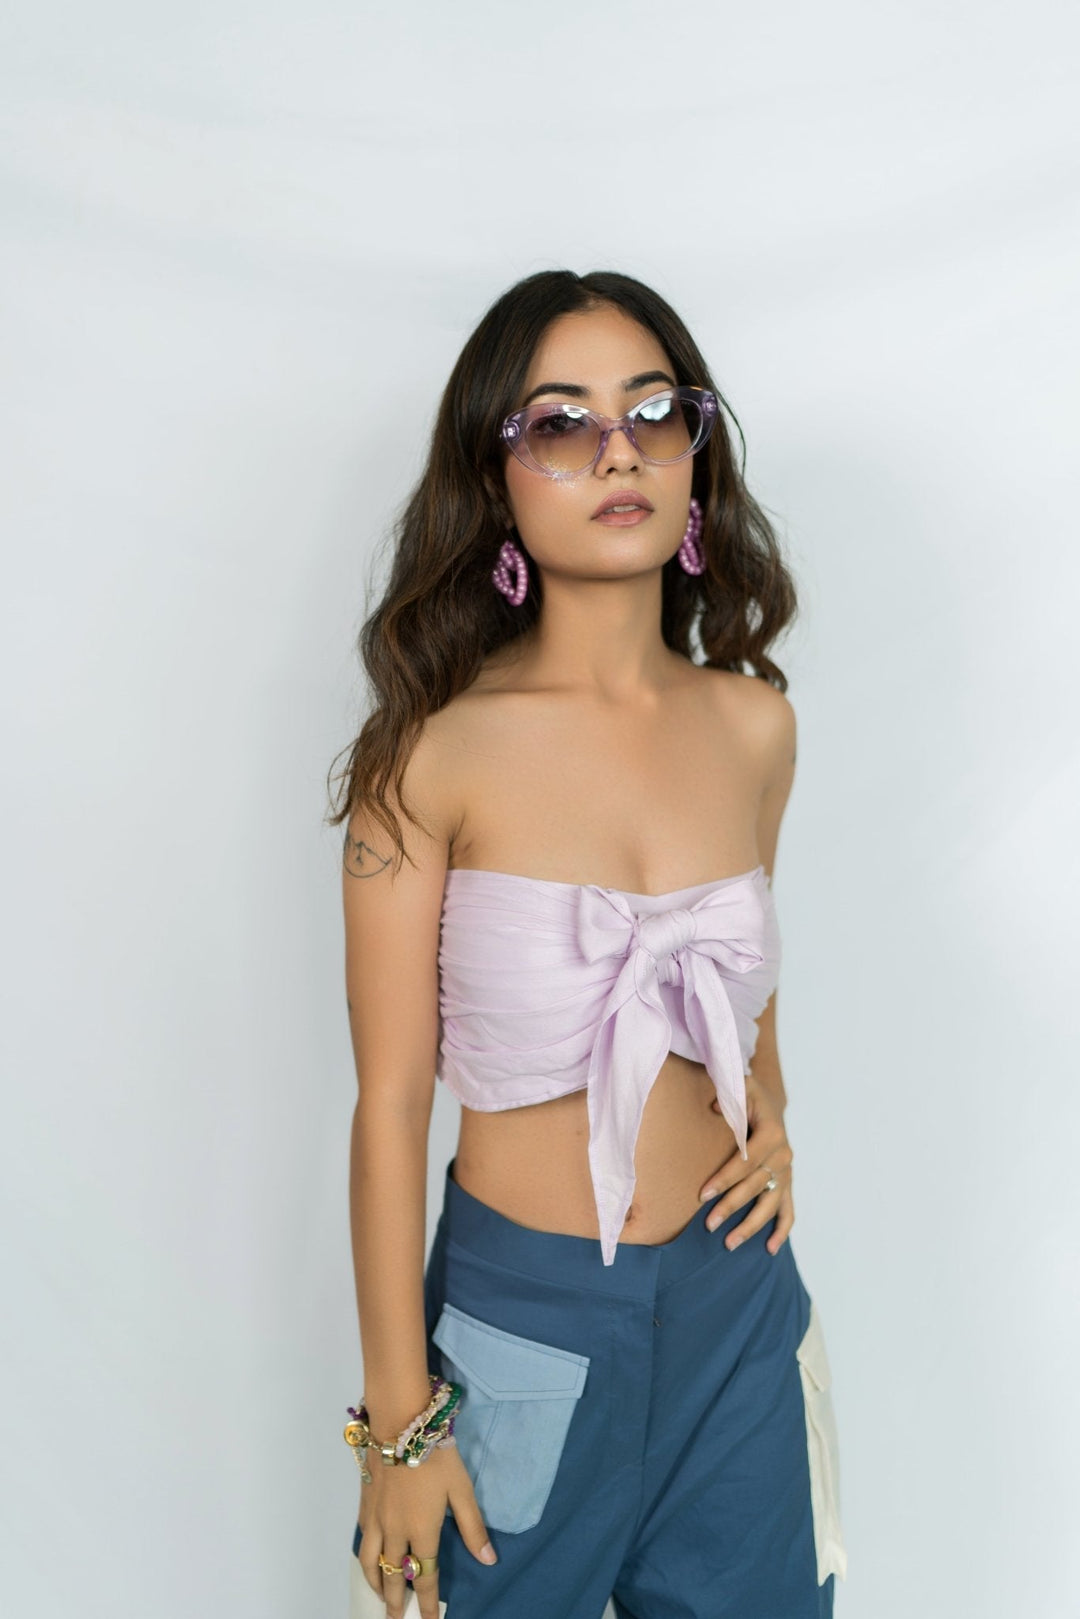 Stylish Strapless Tops for Women  Crop, Corset & Tube Varieties 